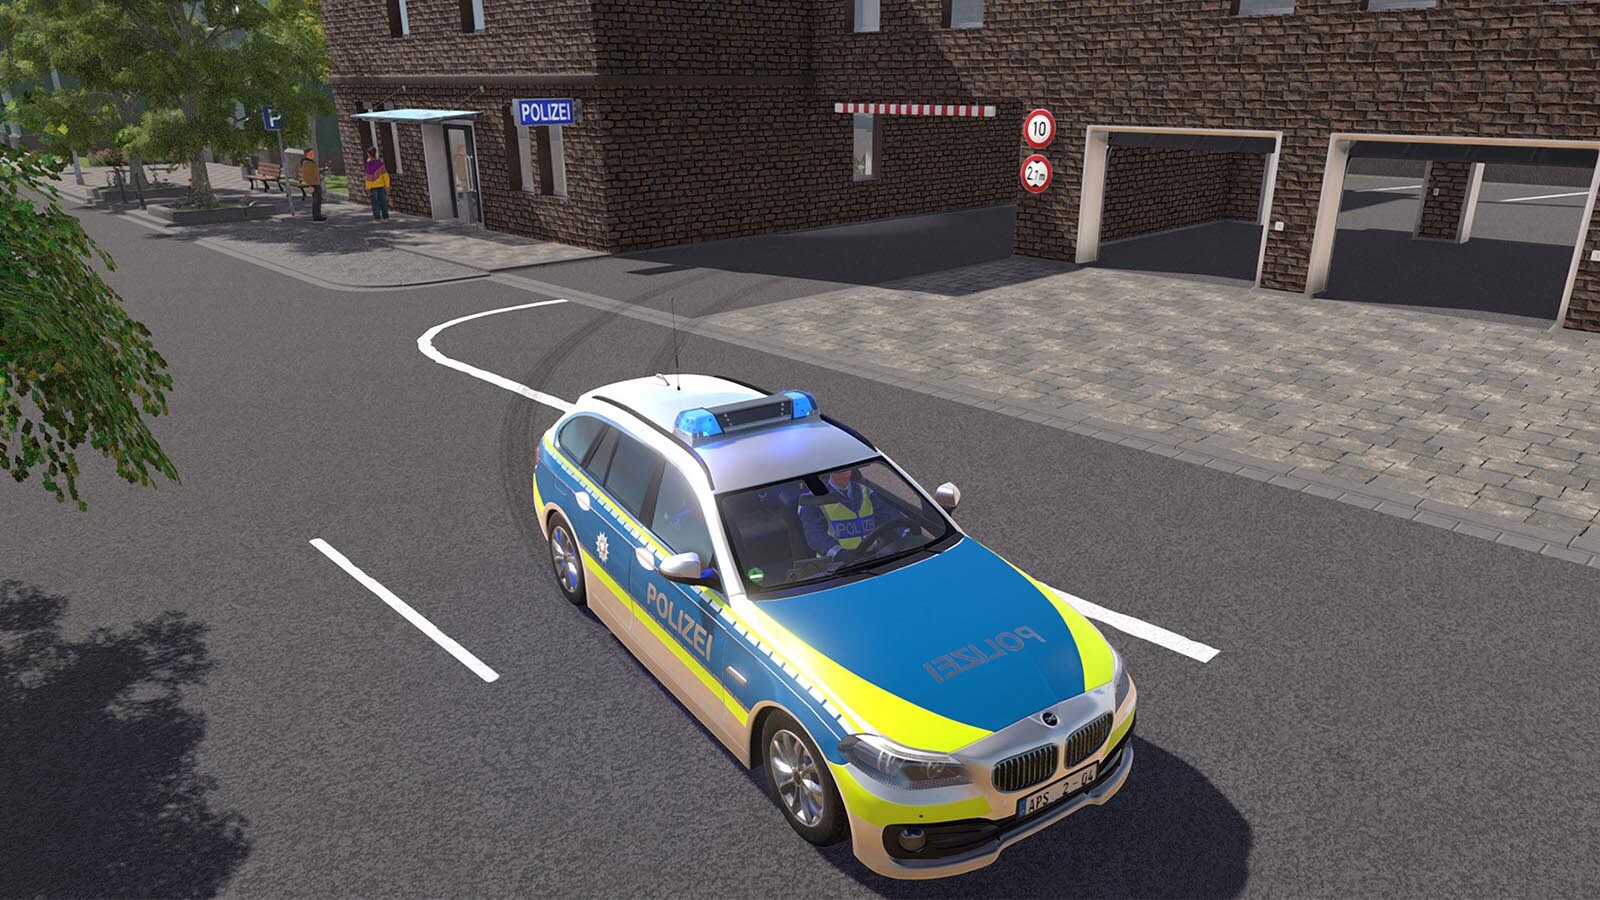 - now for Steam 2 PC Key Police Autobahn Simulator Buy